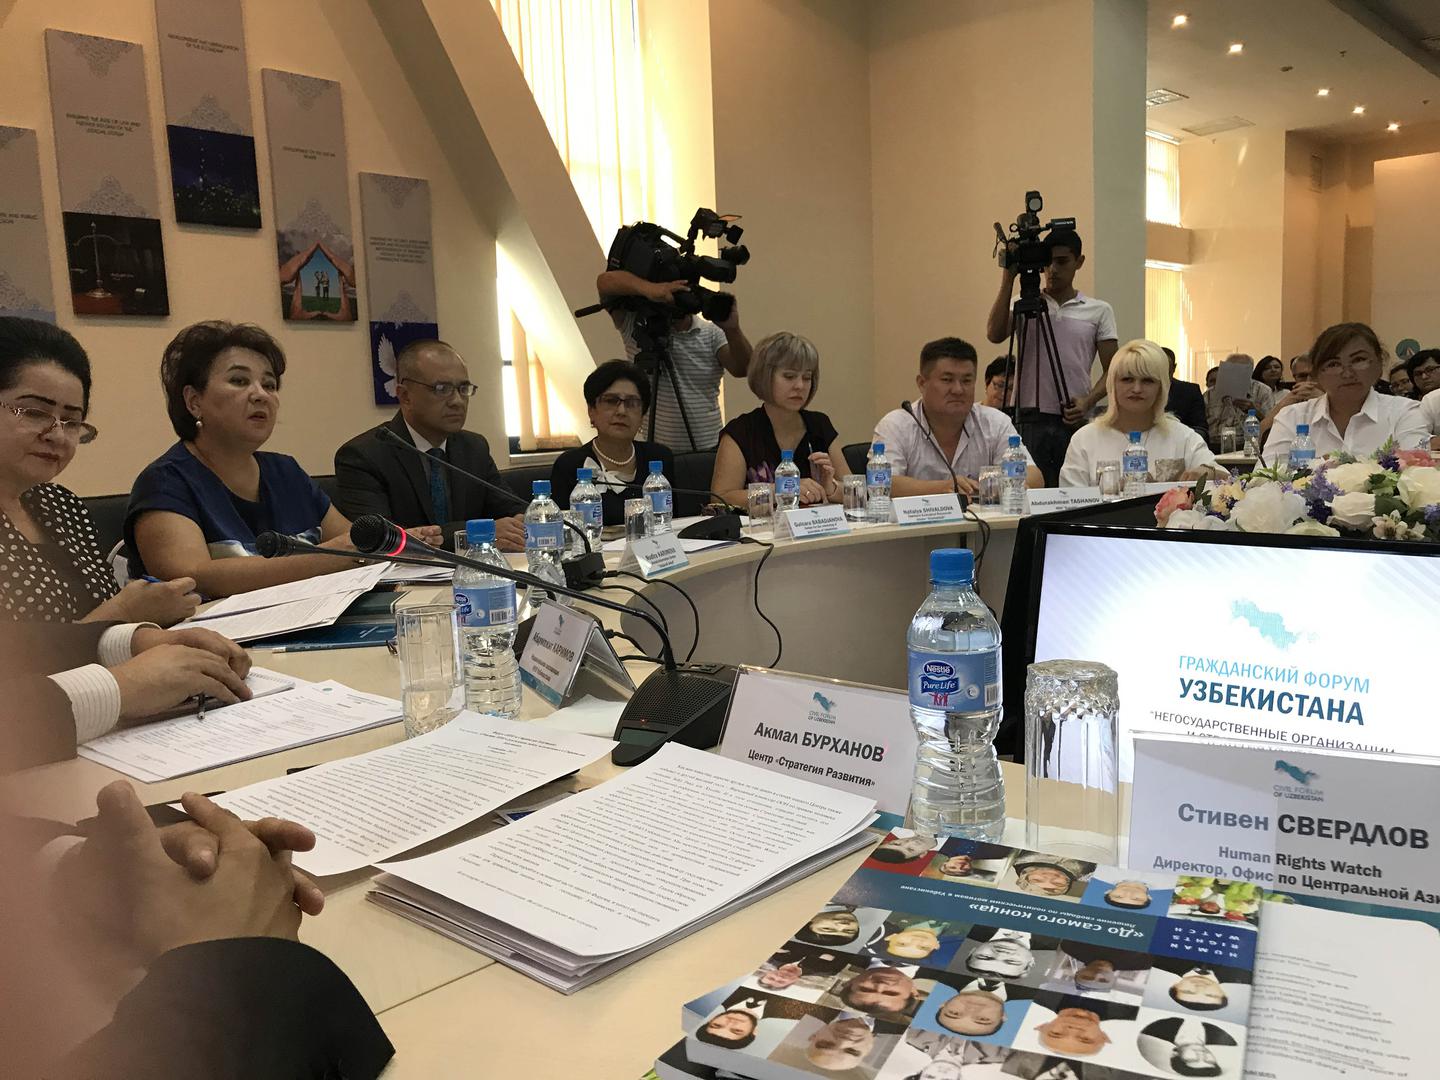 Press conference with Human Rights Watch and representatives of non-governmental organizations at National Action Strategy Center, Tashkent, September 2017.